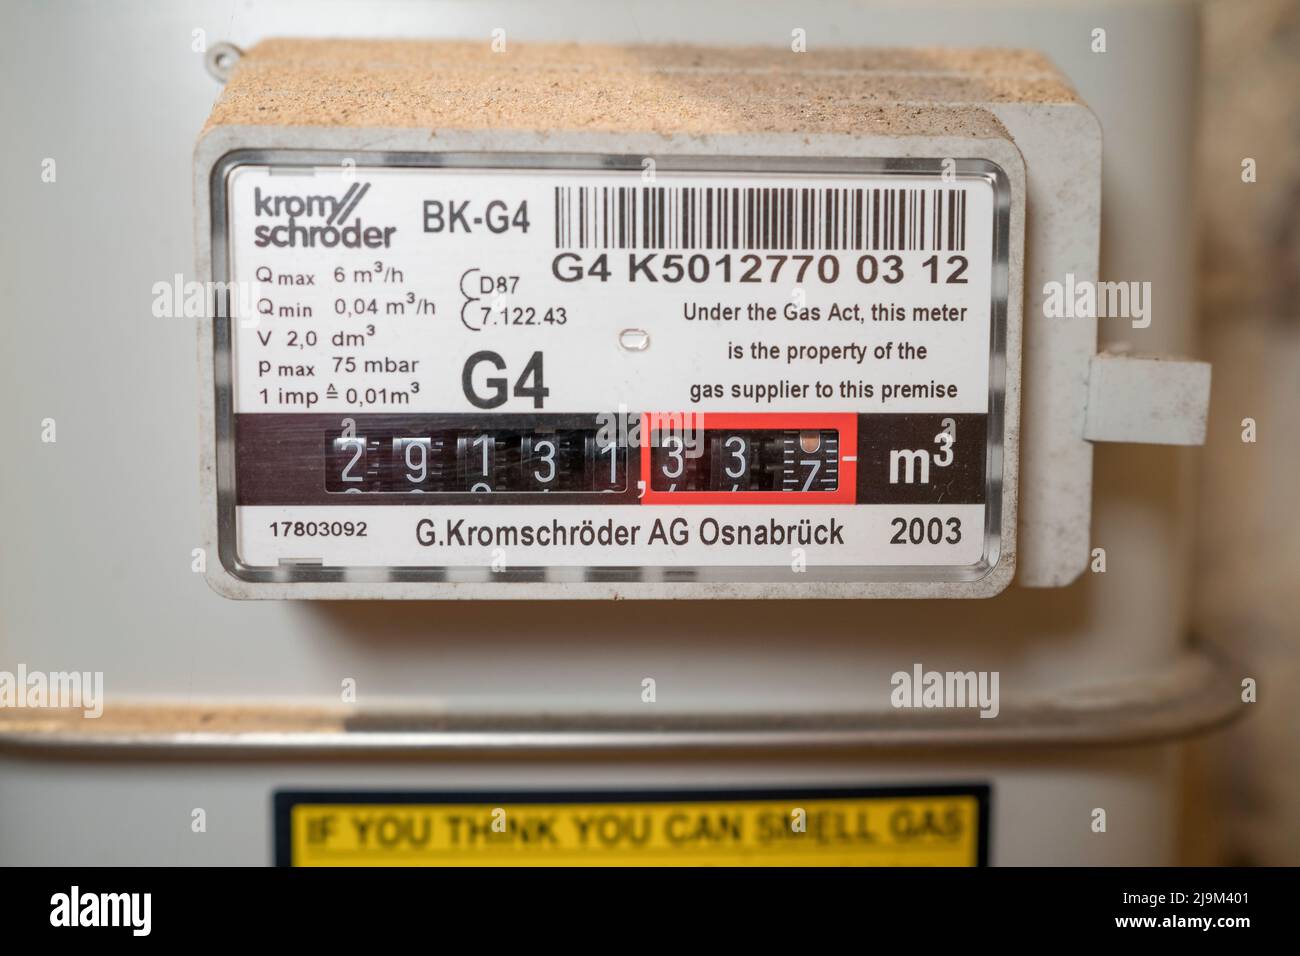 Close up of a Krom Schroder domestic gas meter in a UK residential property, measuring energy usage. Stock Photo